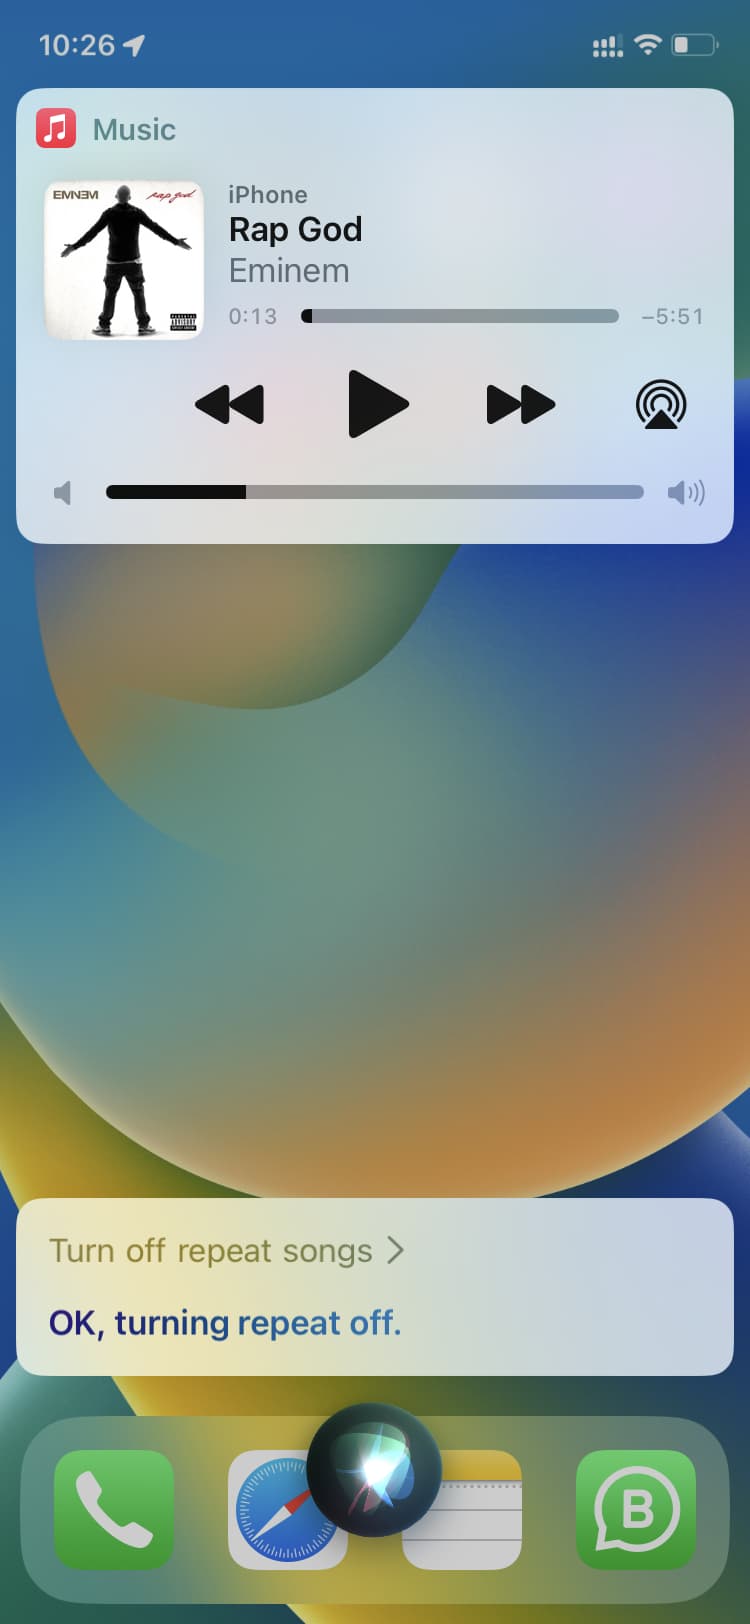 Ask Siri to turn off repeat songs